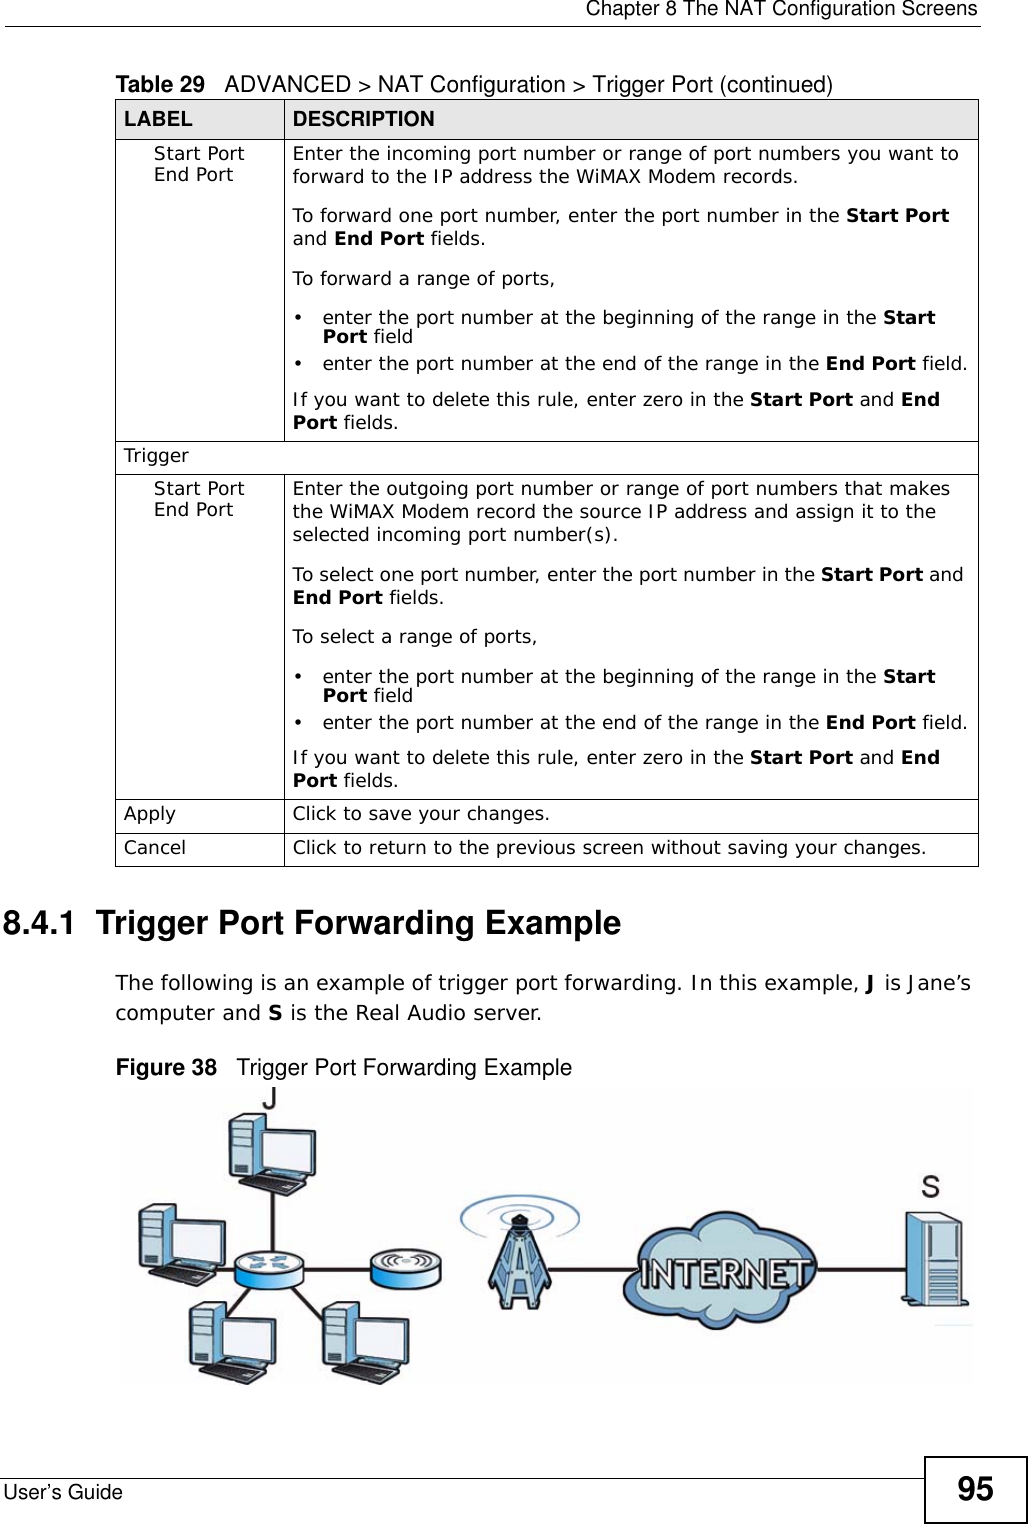  Chapter 8 The NAT Configuration ScreensUser’s Guide 958.4.1  Trigger Port Forwarding ExampleThe following is an example of trigger port forwarding. In this example, J is Jane’s computer and S is the Real Audio server.Figure 38   Trigger Port Forwarding ExampleStart PortEnd Port Enter the incoming port number or range of port numbers you want to forward to the IP address the WiMAX Modem records.To forward one port number, enter the port number in the Start Port and End Port fields.To forward a range of ports,• enter the port number at the beginning of the range in the Start Port field• enter the port number at the end of the range in the End Port field.If you want to delete this rule, enter zero in the Start Port and End Port fields.TriggerStart PortEnd Port Enter the outgoing port number or range of port numbers that makes the WiMAX Modem record the source IP address and assign it to the selected incoming port number(s).To select one port number, enter the port number in the Start Port and End Port fields.To select a range of ports,• enter the port number at the beginning of the range in the Start Port field• enter the port number at the end of the range in the End Port field.If you want to delete this rule, enter zero in the Start Port and End Port fields.Apply Click to save your changes.Cancel Click to return to the previous screen without saving your changes.Table 29   ADVANCED &gt; NAT Configuration &gt; Trigger Port (continued)LABEL DESCRIPTION